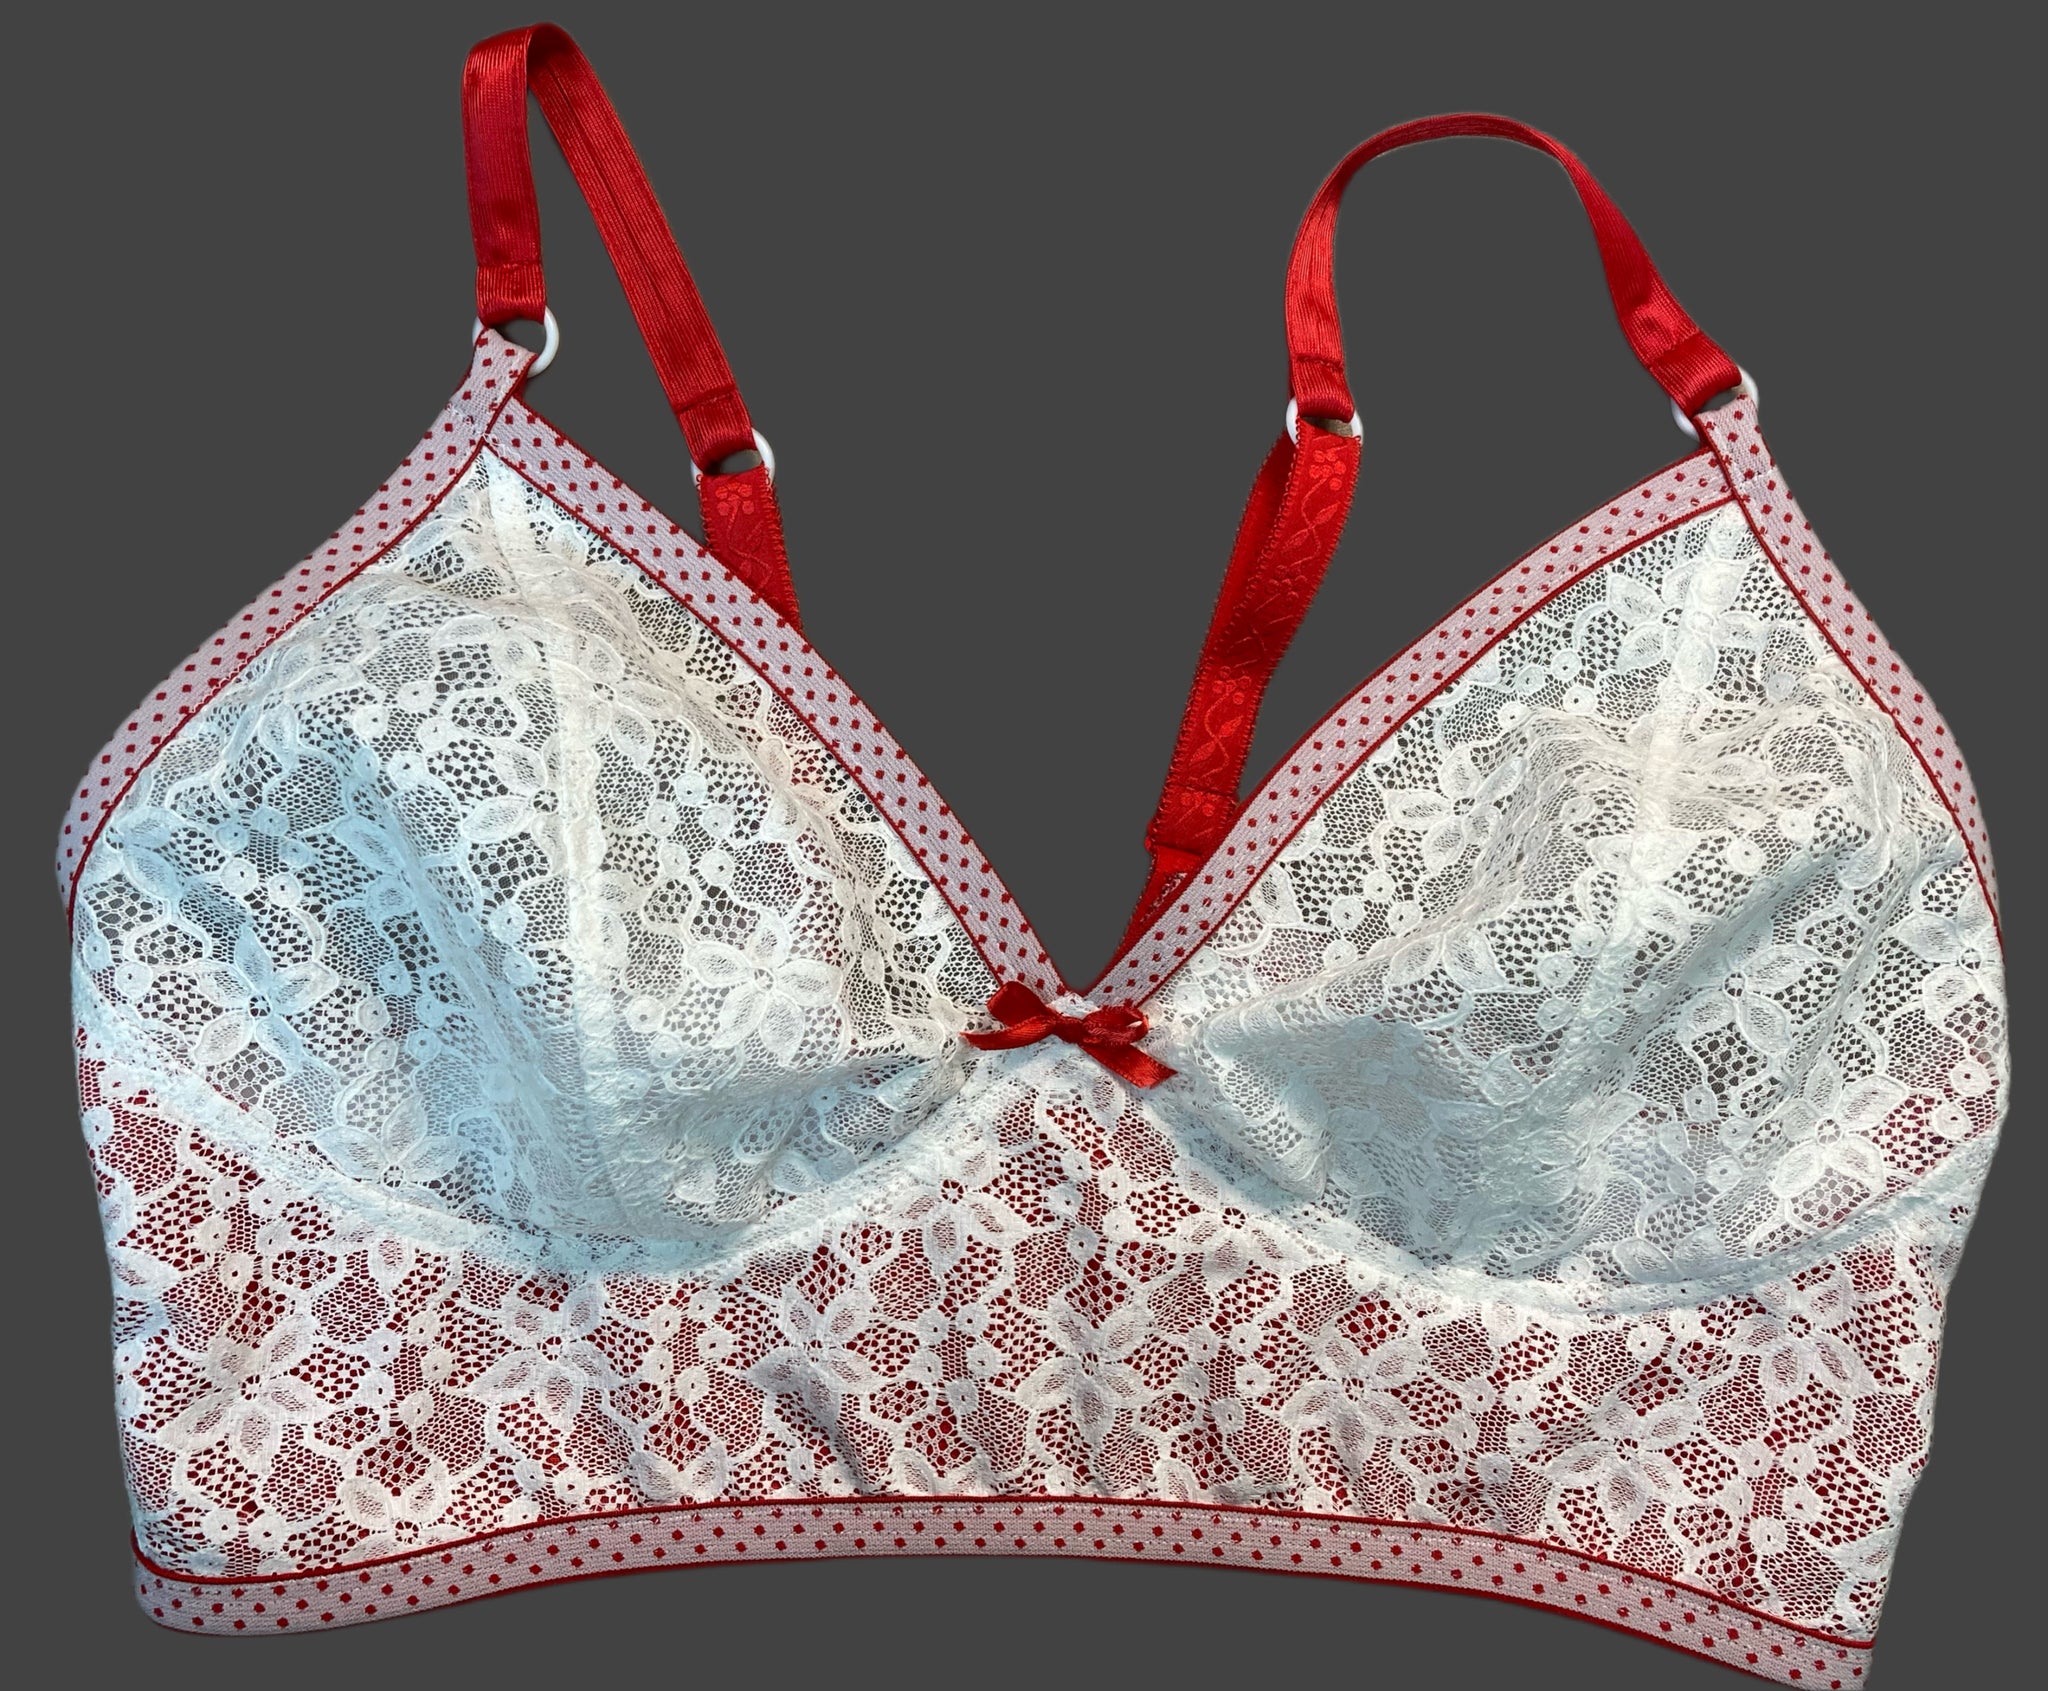 LEARN TO SEW A COMFORTABLE & SUPPORTIVE WIRELESS BRA